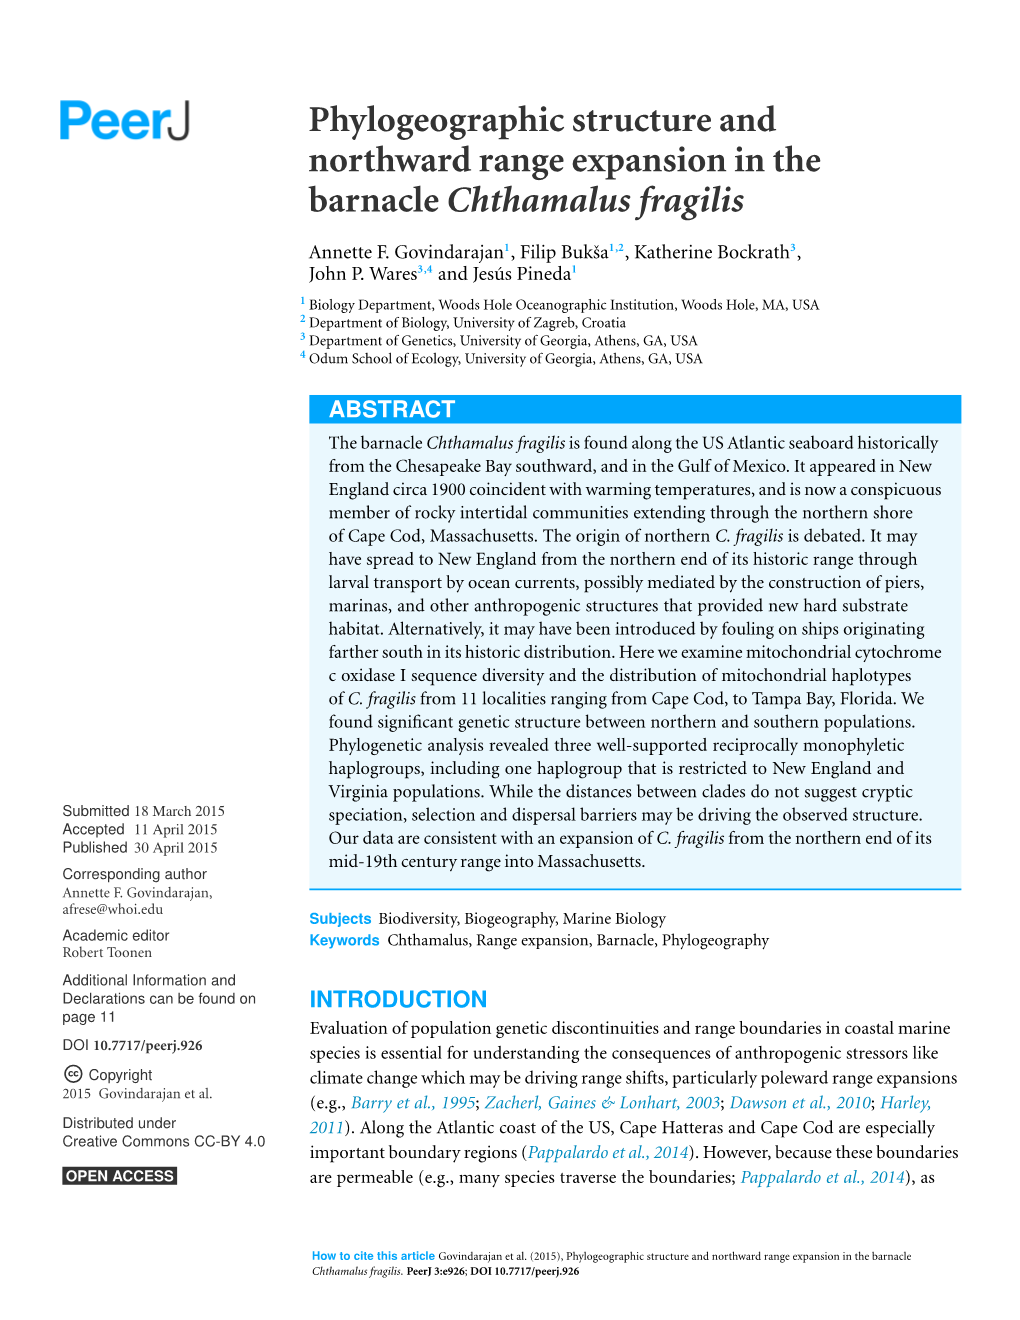 Phylogeographic Structure and Northward Range Expansion in the Barnacle Chthamalus Fragilis